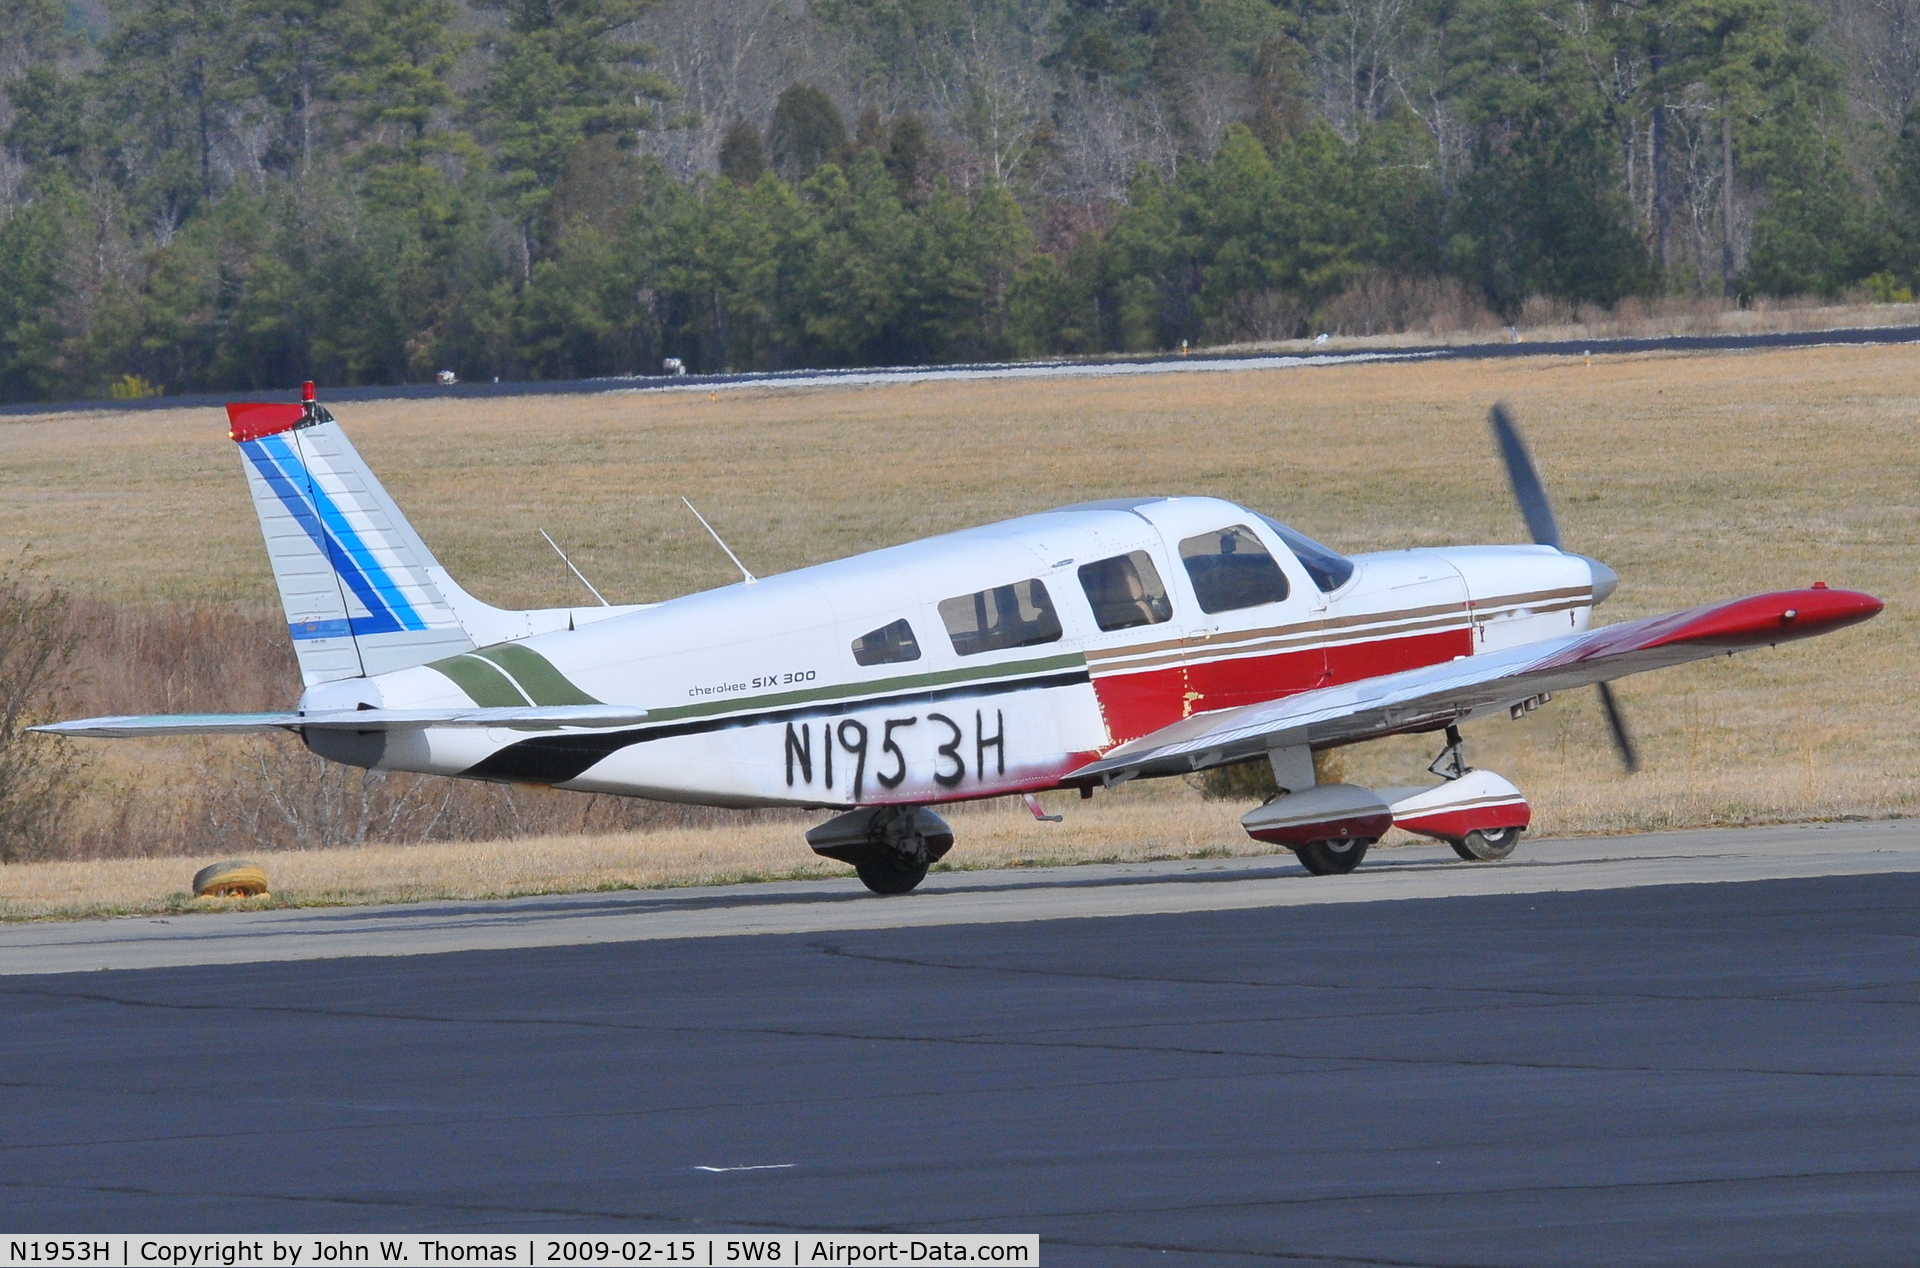 N1953H, 1977 Piper PA-32-300 Cherokee Six C/N 32-7740044, At rest